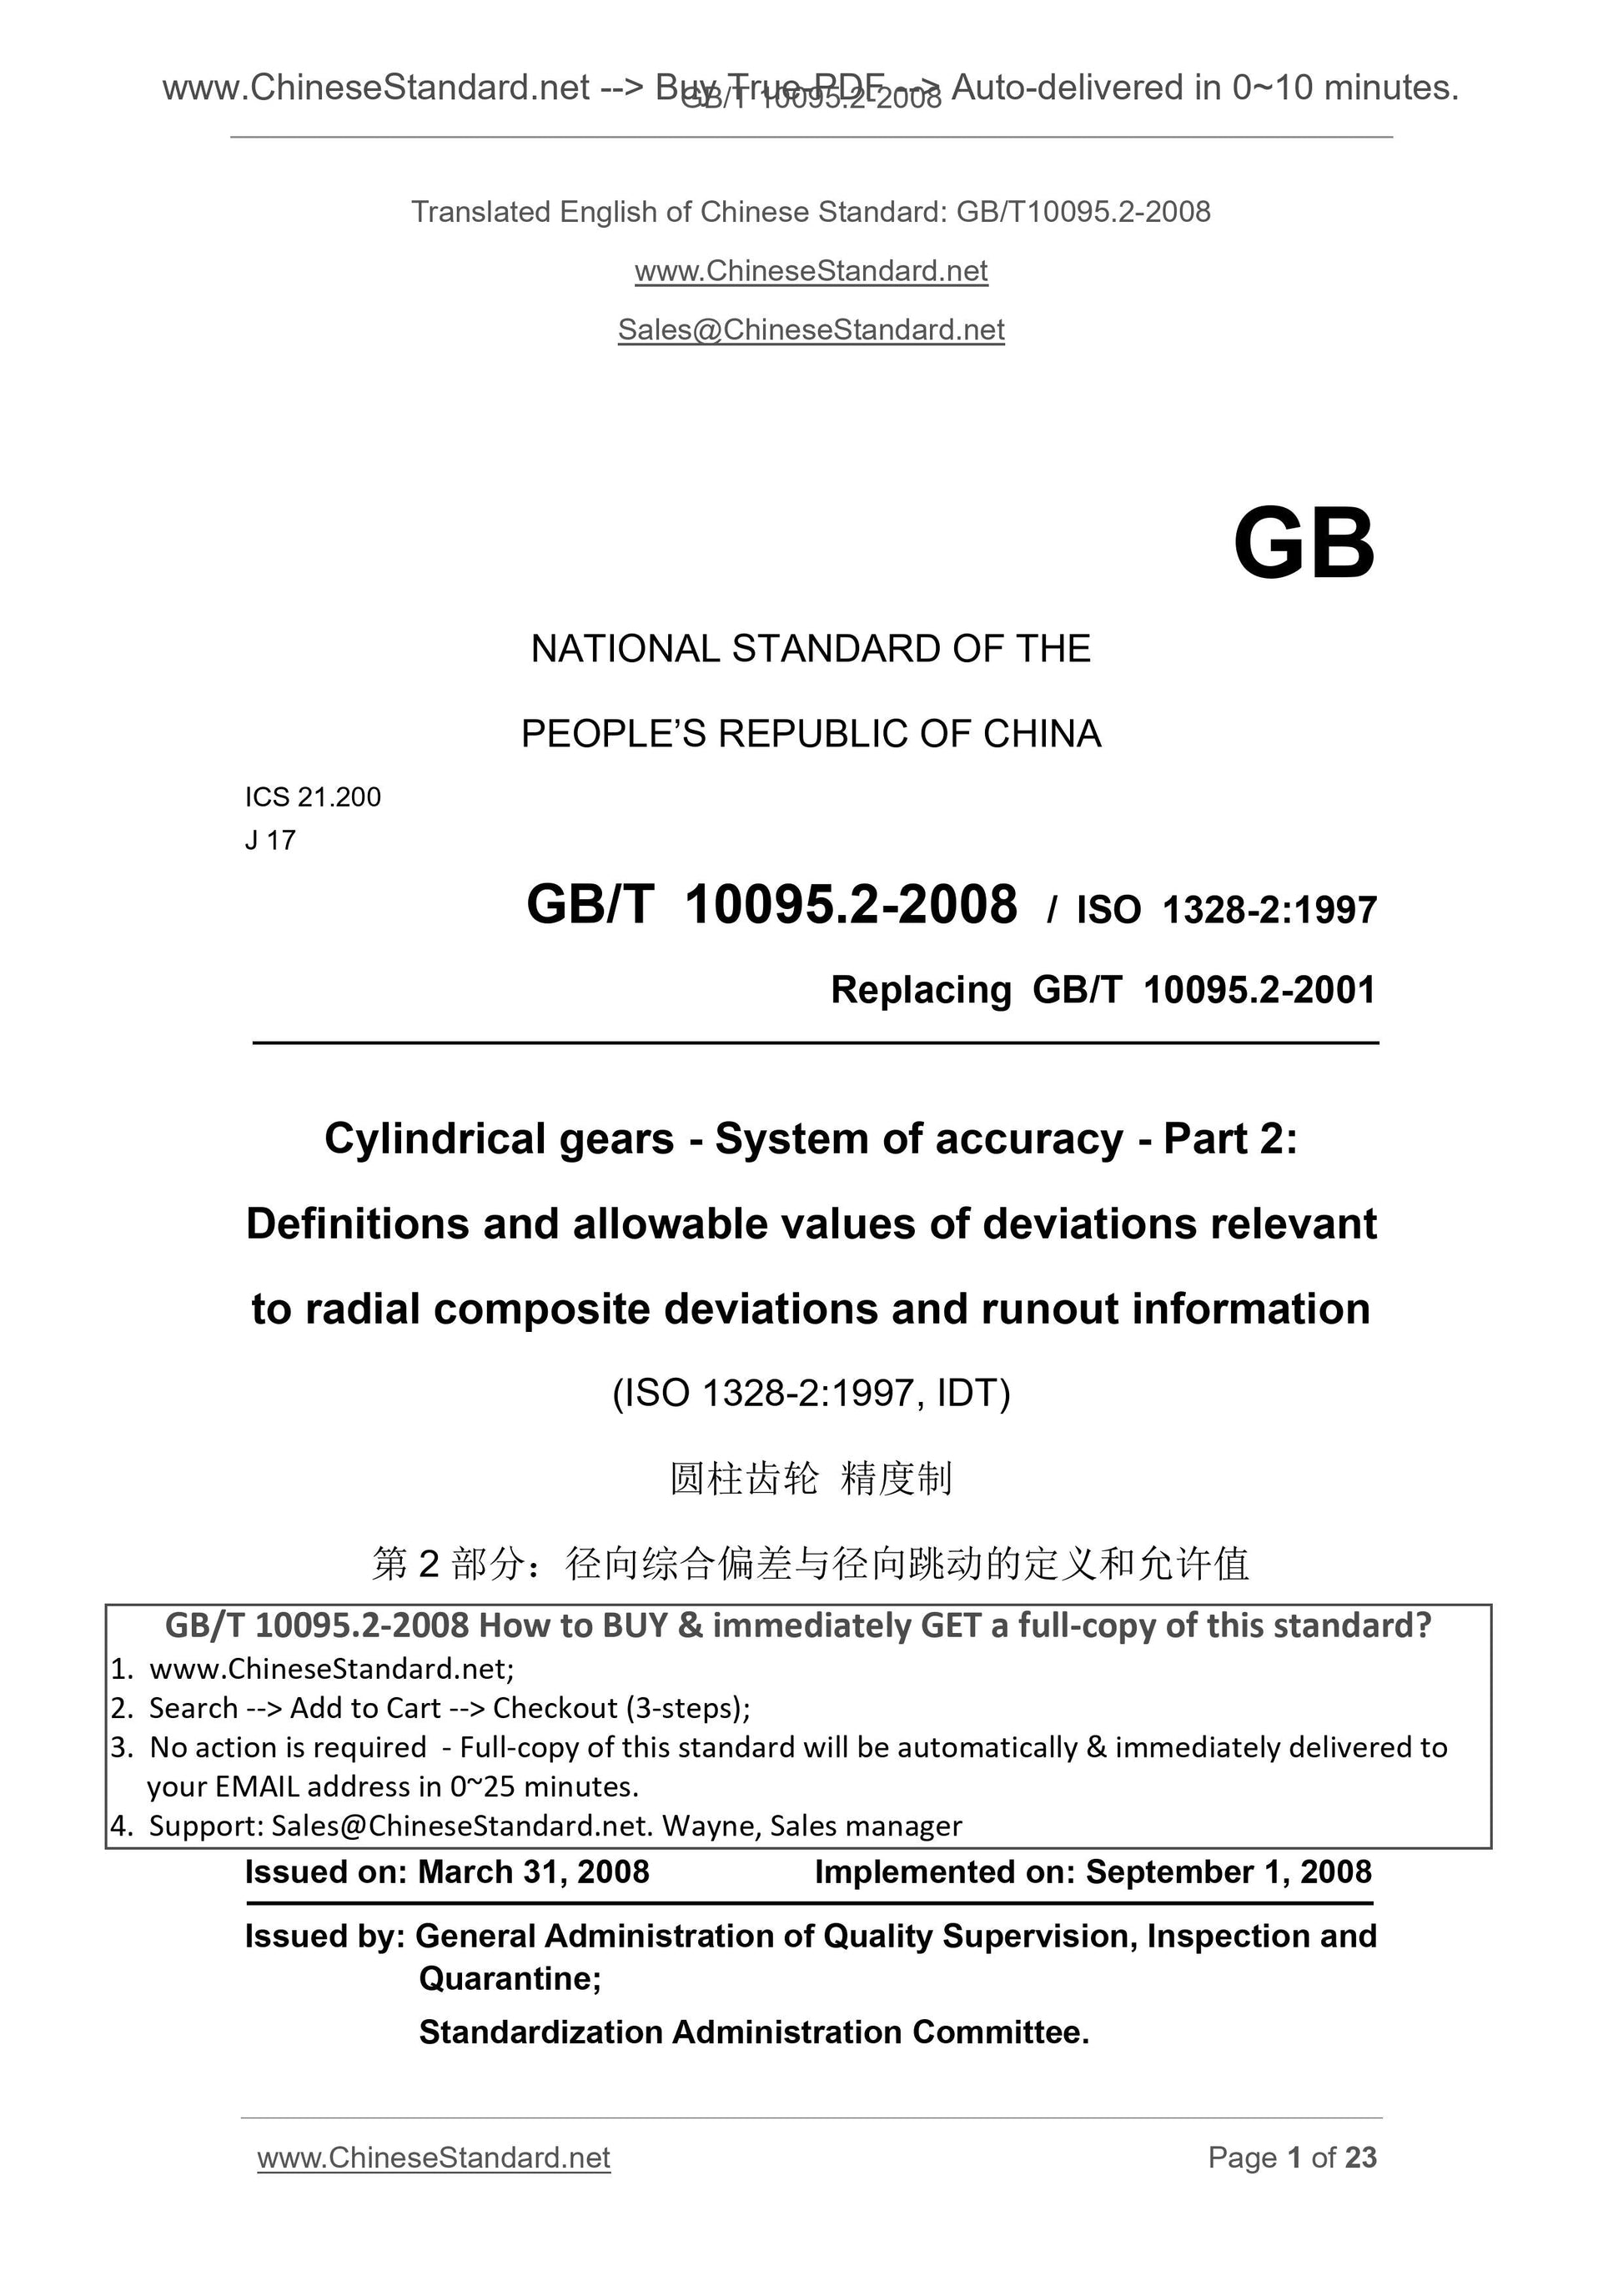 GB/T 10095.2-2008 Page 1